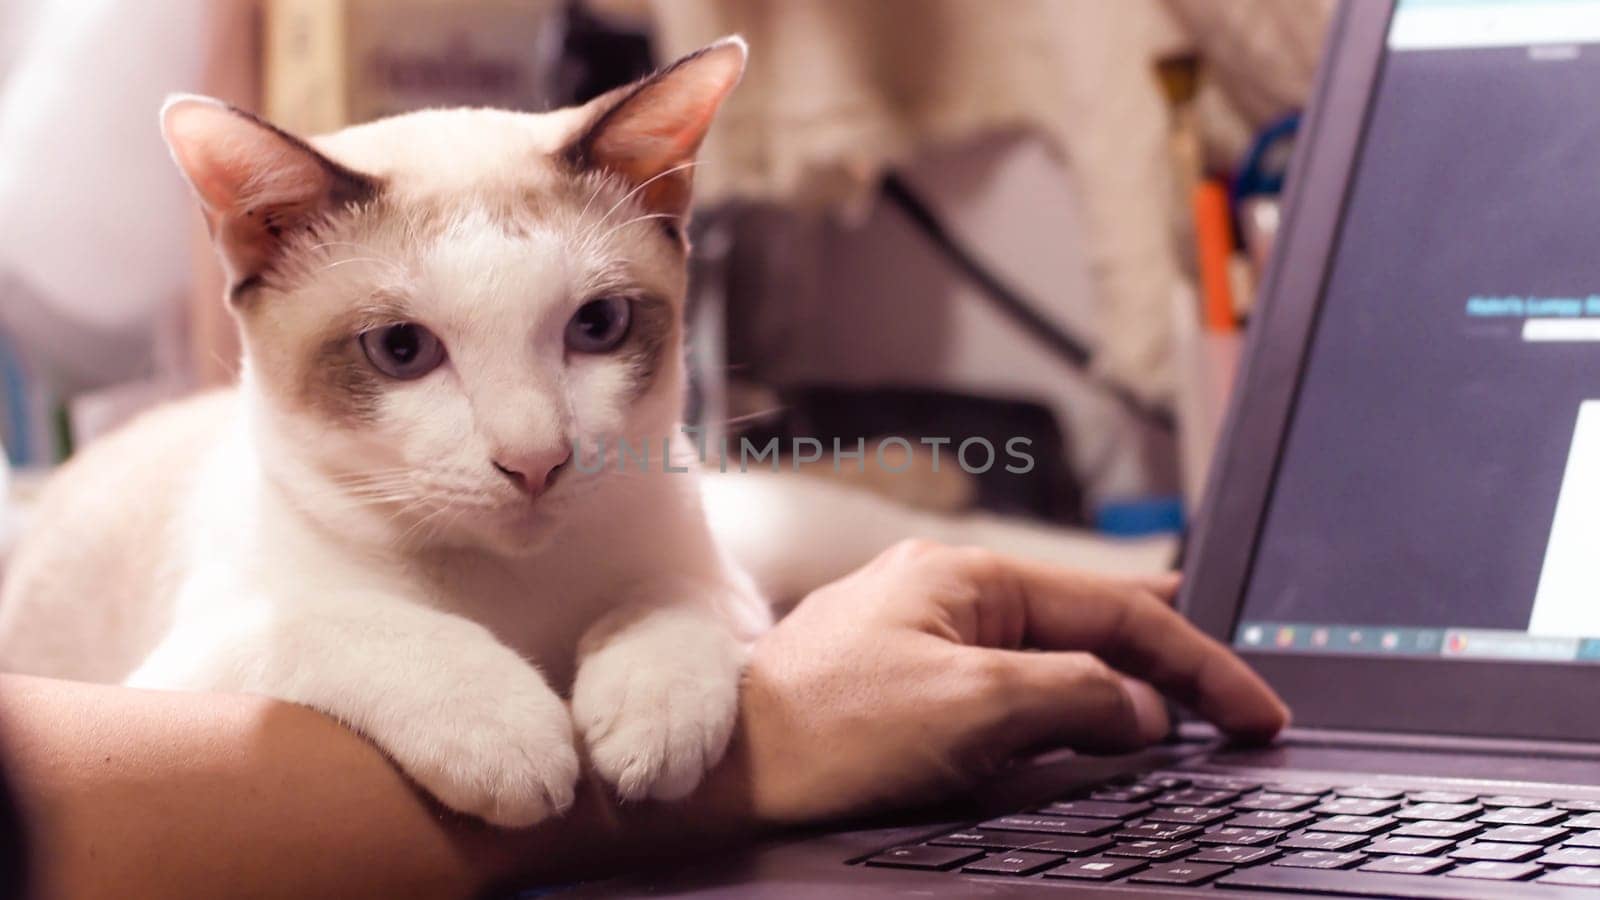 Pawsitive Work Vibes: Cat's Touch of Inspiration as Man Navigates the Computer